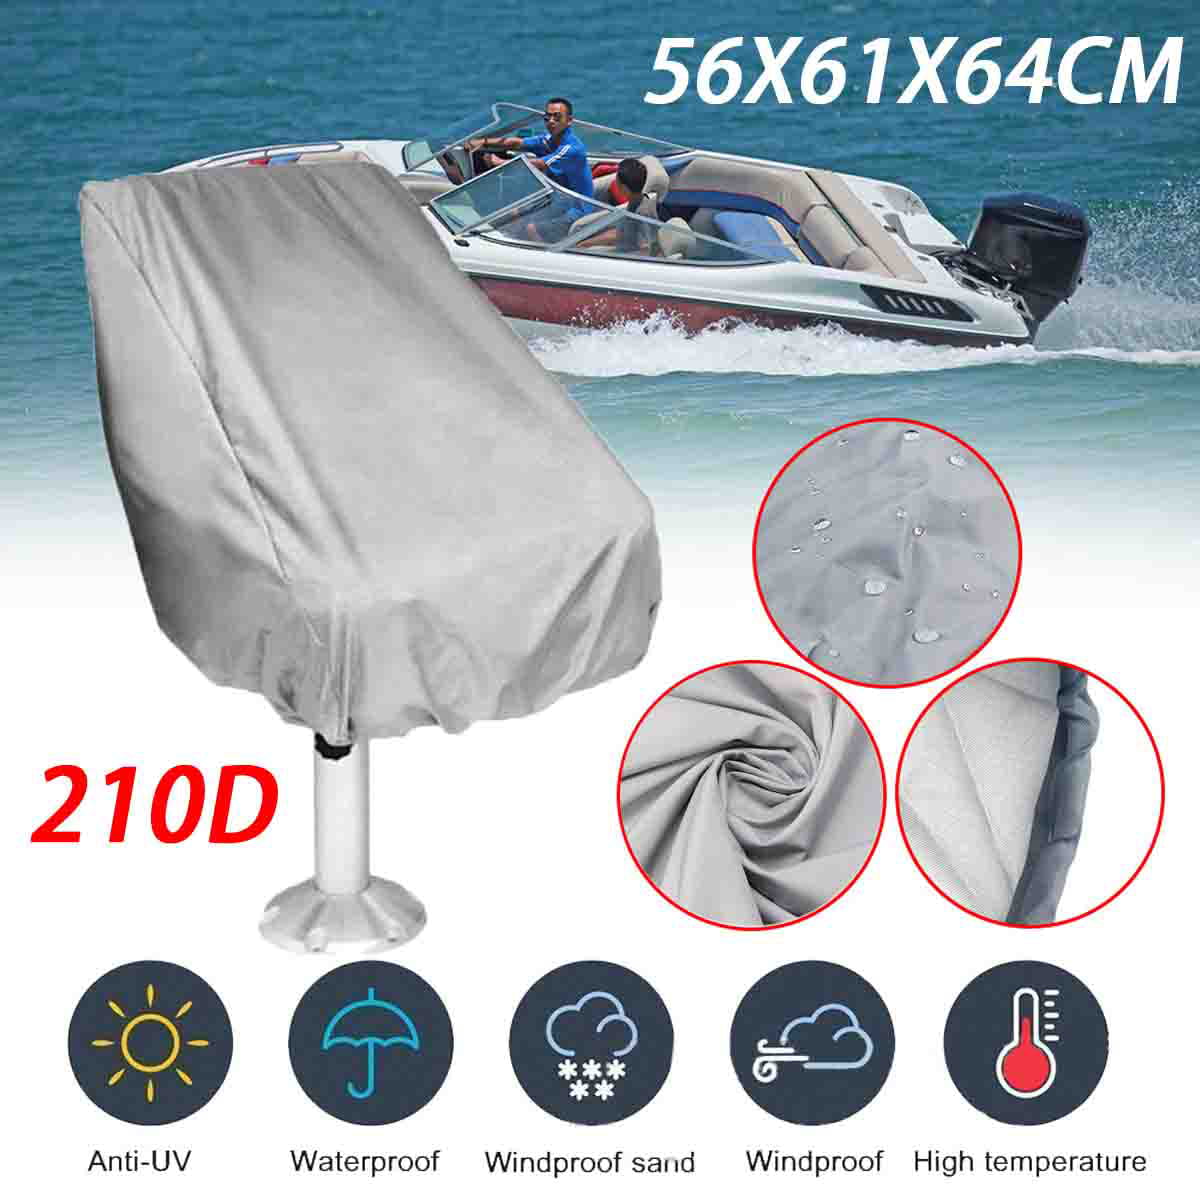 FITS 141 FT to 16 Long Deck Area UP to 102 Beam Elastic New Beige 16 FT VORTEX Ultra 5 Year Canvas Pontoon/Deck Boat Cover Fast 1 to 4 Business Day DELIVERY Strap System